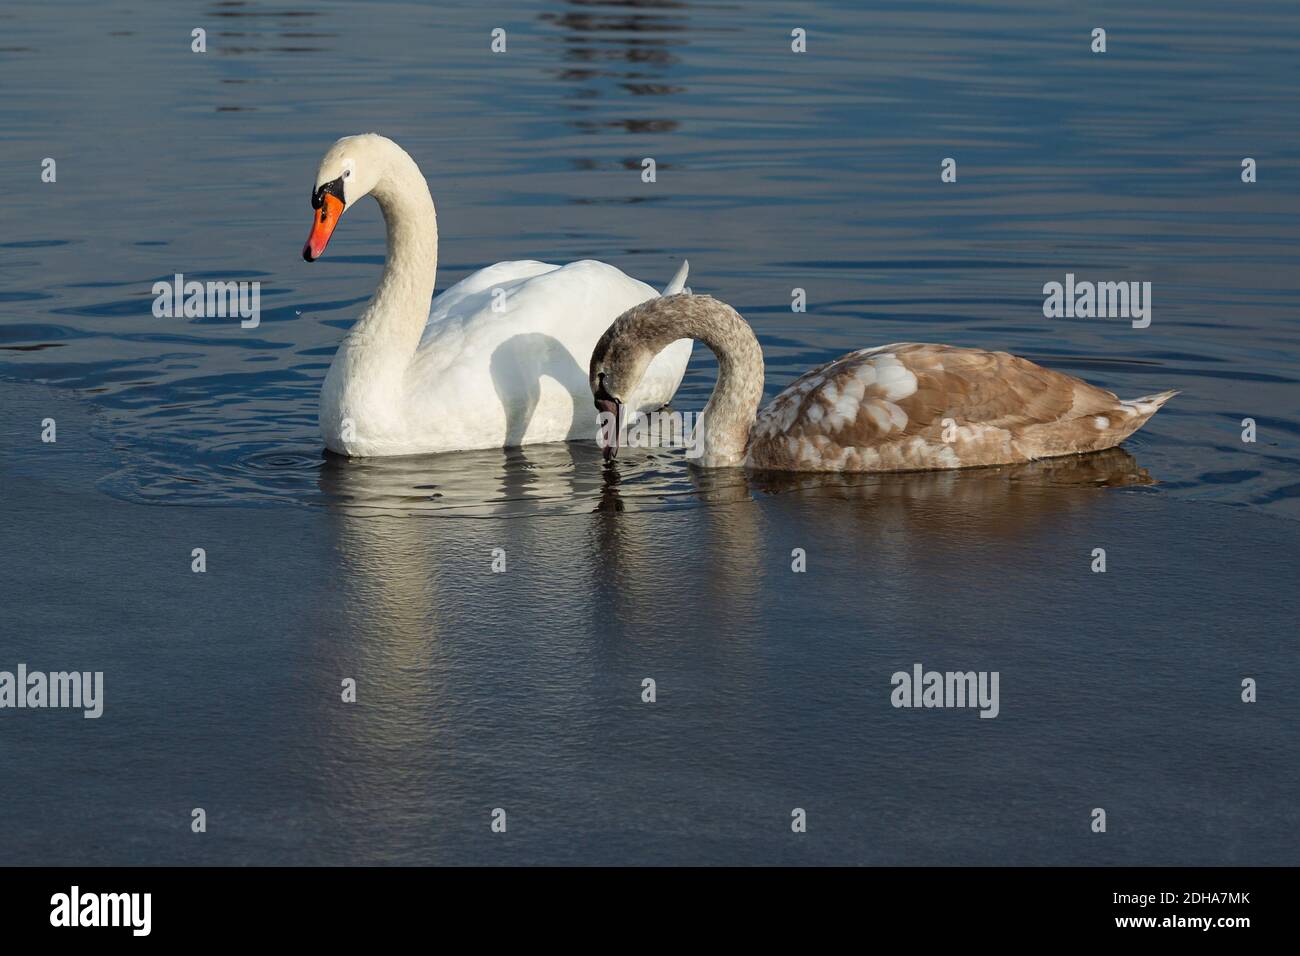 A white mute swan with orange and black beak and young brown coloured offspring with pink beak swimming in a lake with blue water on winter sunny day. Stock Photo